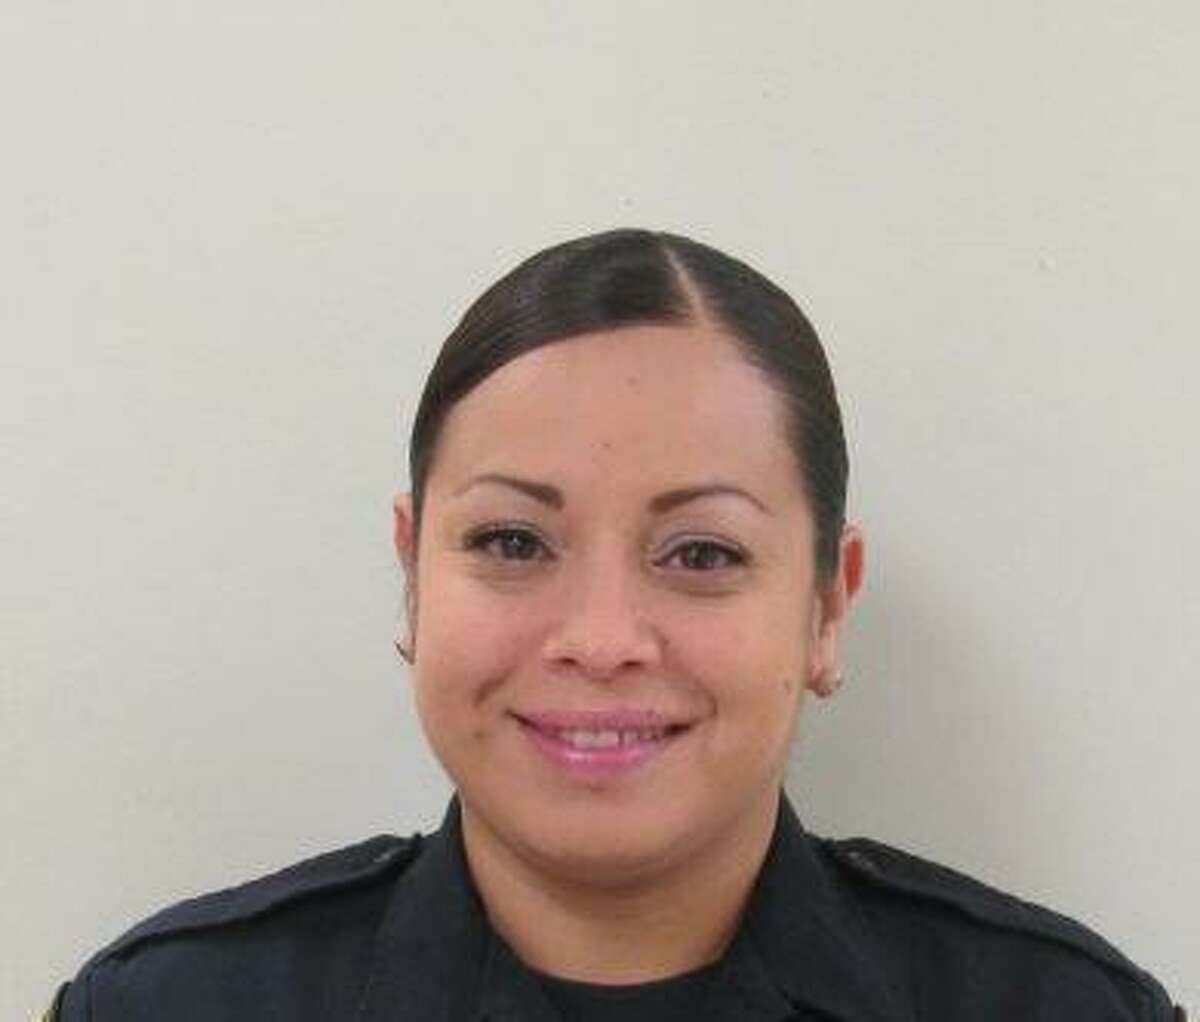 Adelina Agosto, a 17-year veteran of the Bexar County Sheriff’s Office, has been charged with criminal mischief greater than $100 and less than $750, a Class B misdemeanor.